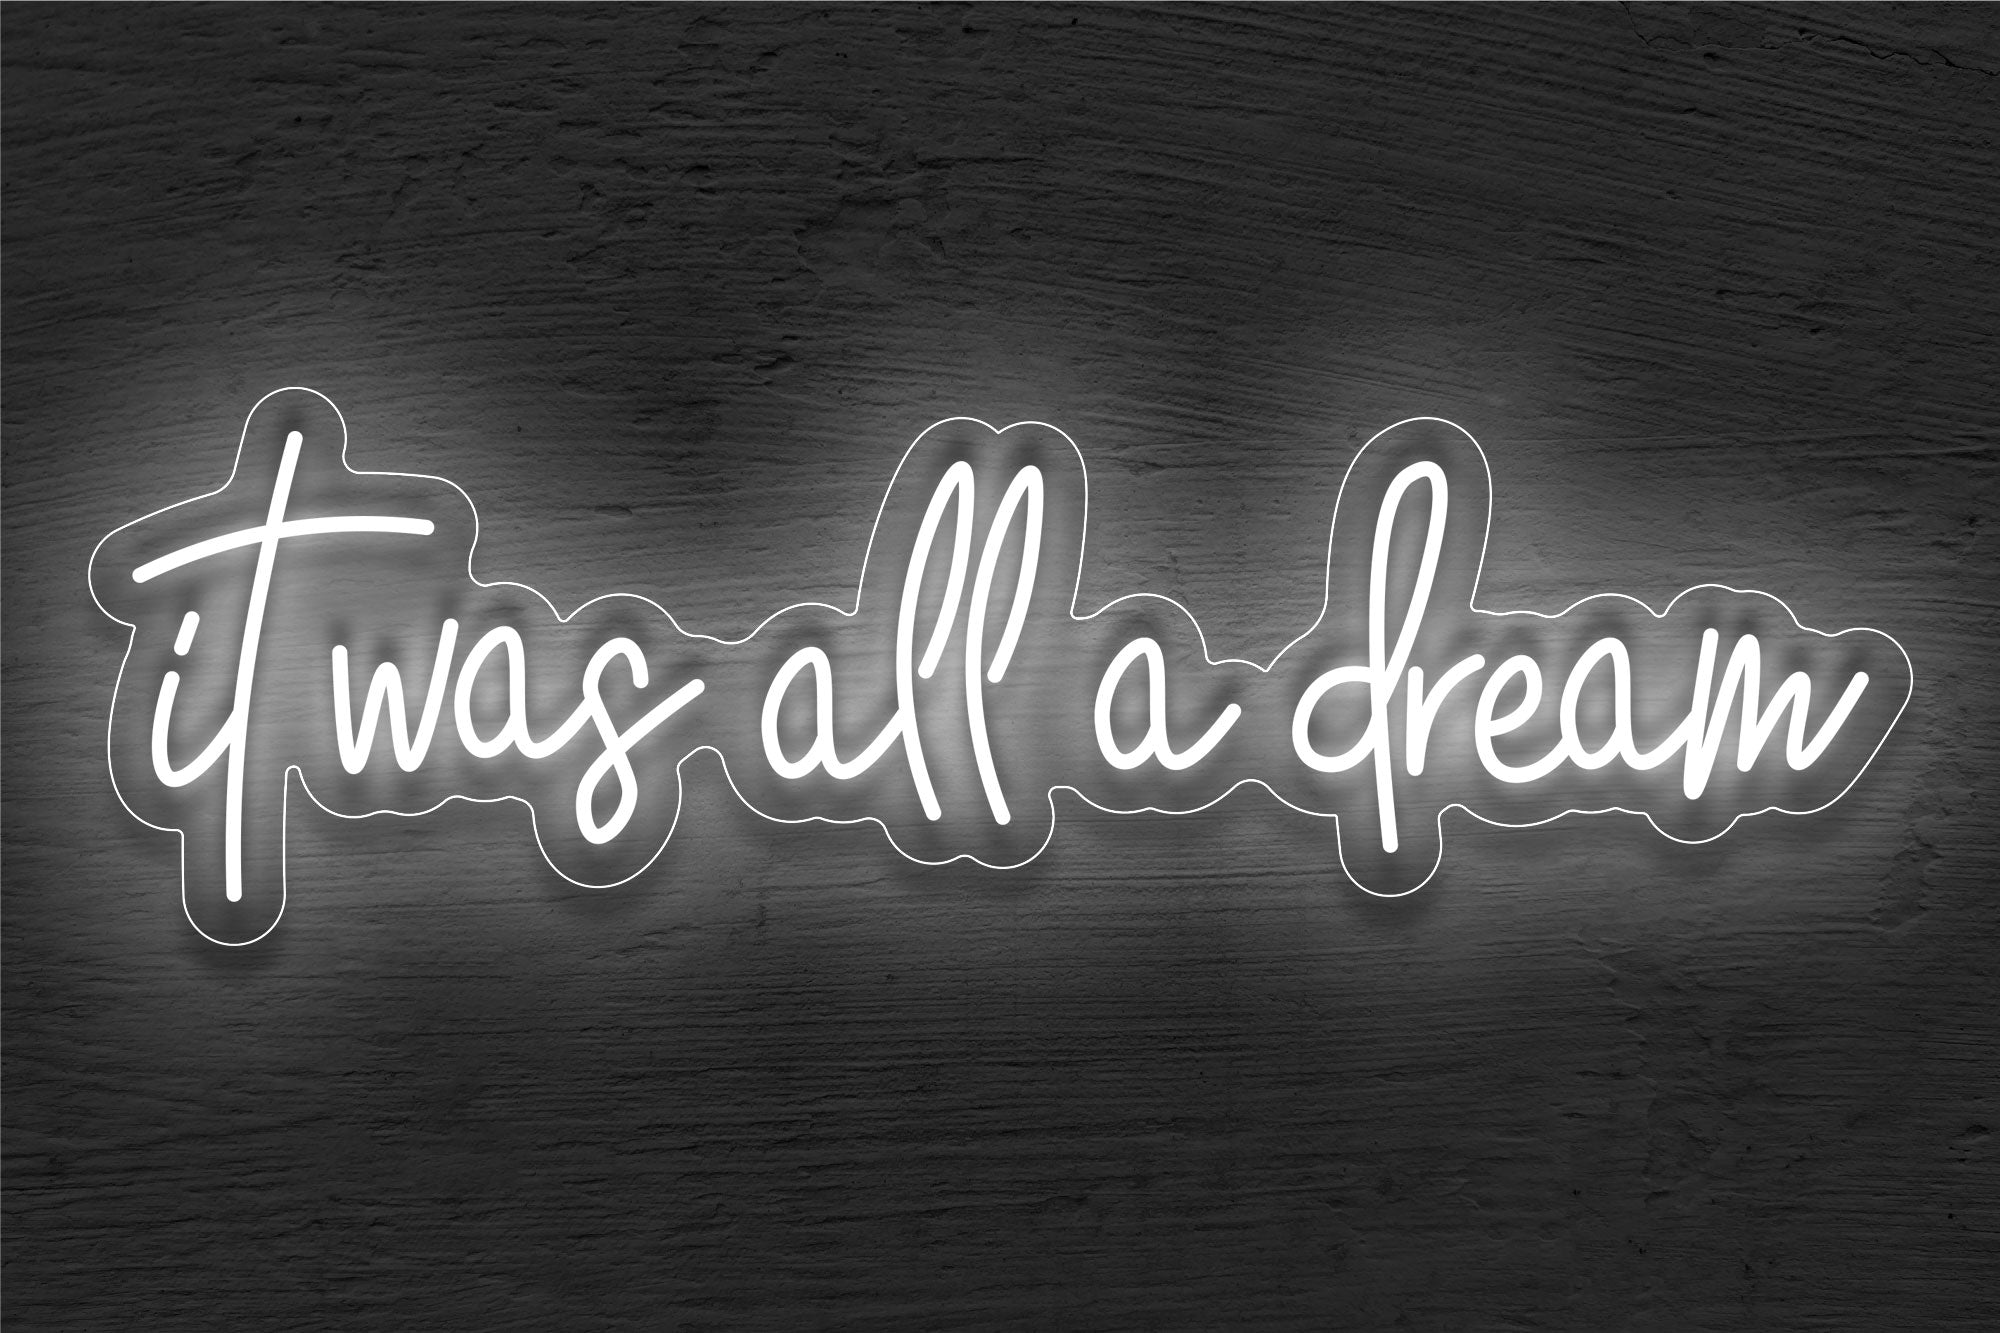 "It Was All a Dream" LED Neon Sign